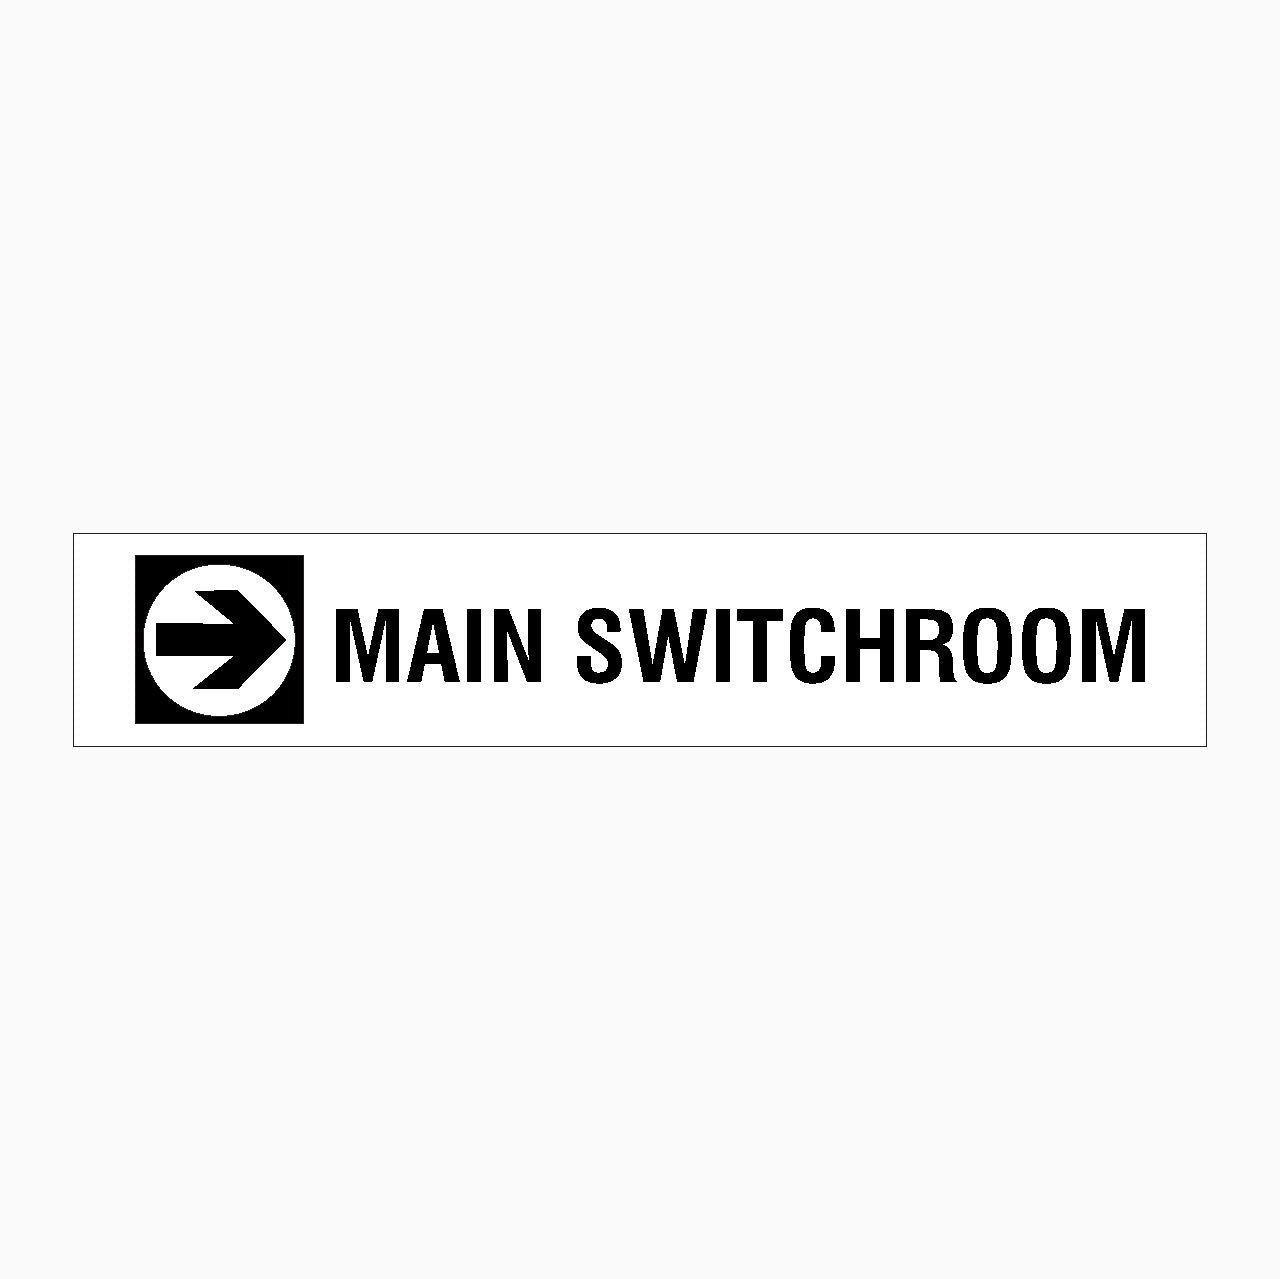 MAIN SWITCH ROOM - RIGHT ARROW SIGN